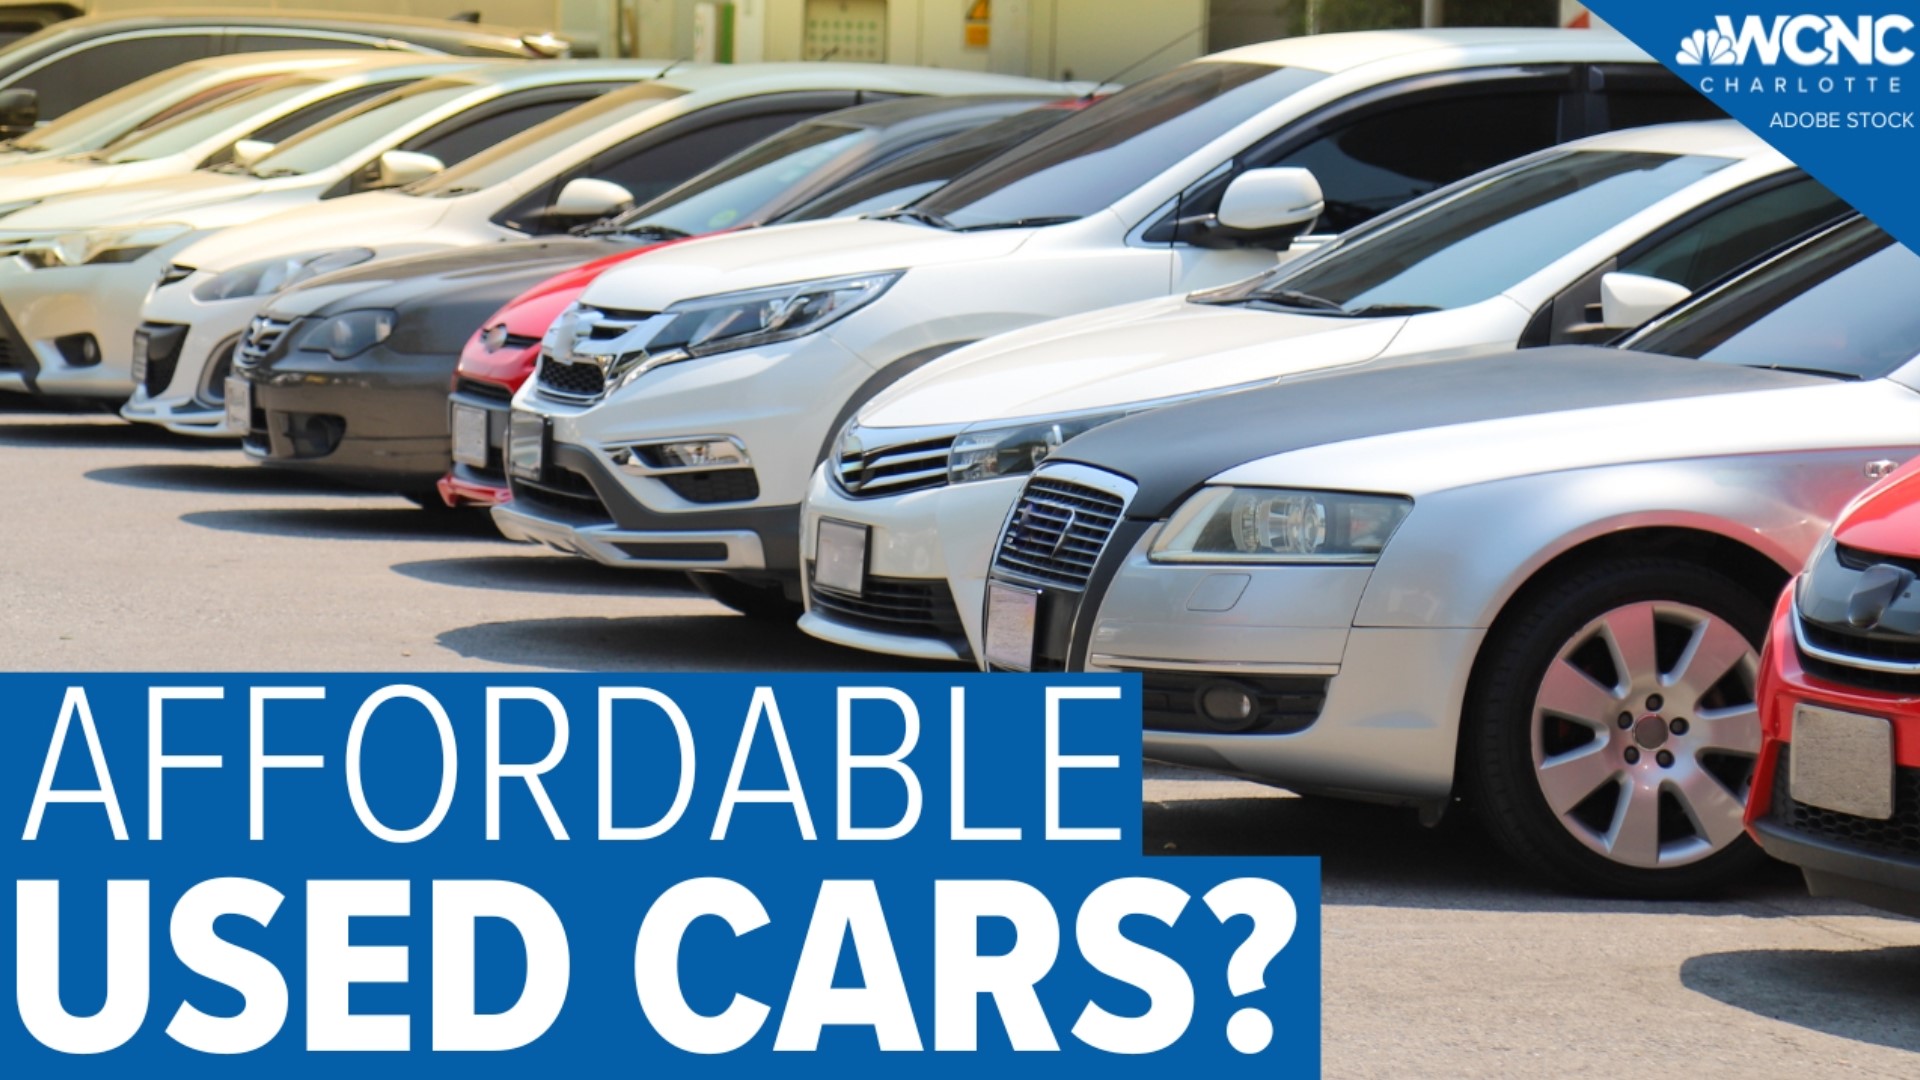 If you're in the market for a used car, you're in luck.